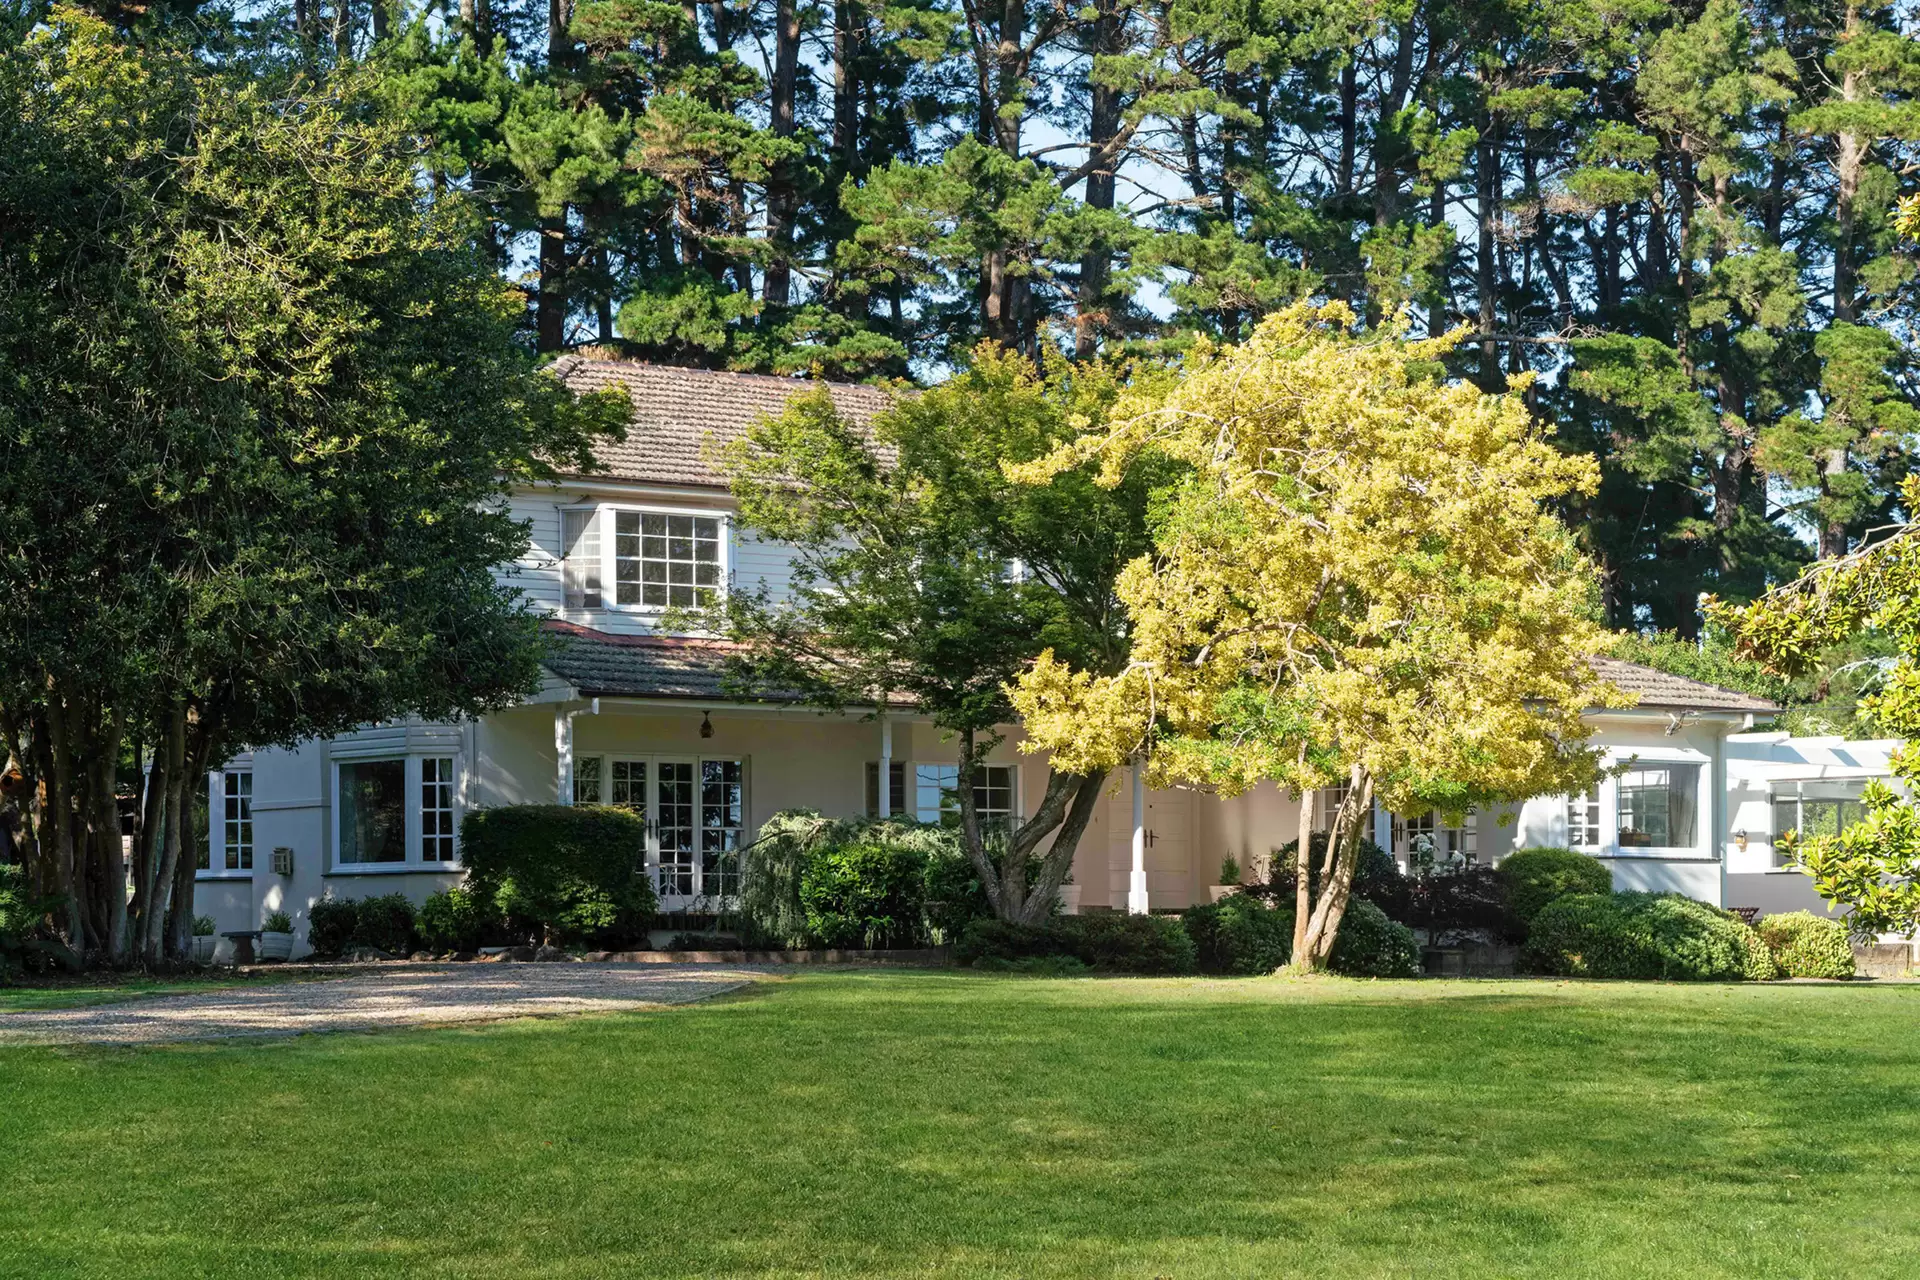 Photo #1: 100 Sproules Lane, Glenquarry - Sold by Drew Lindsay Sotheby's International Realty